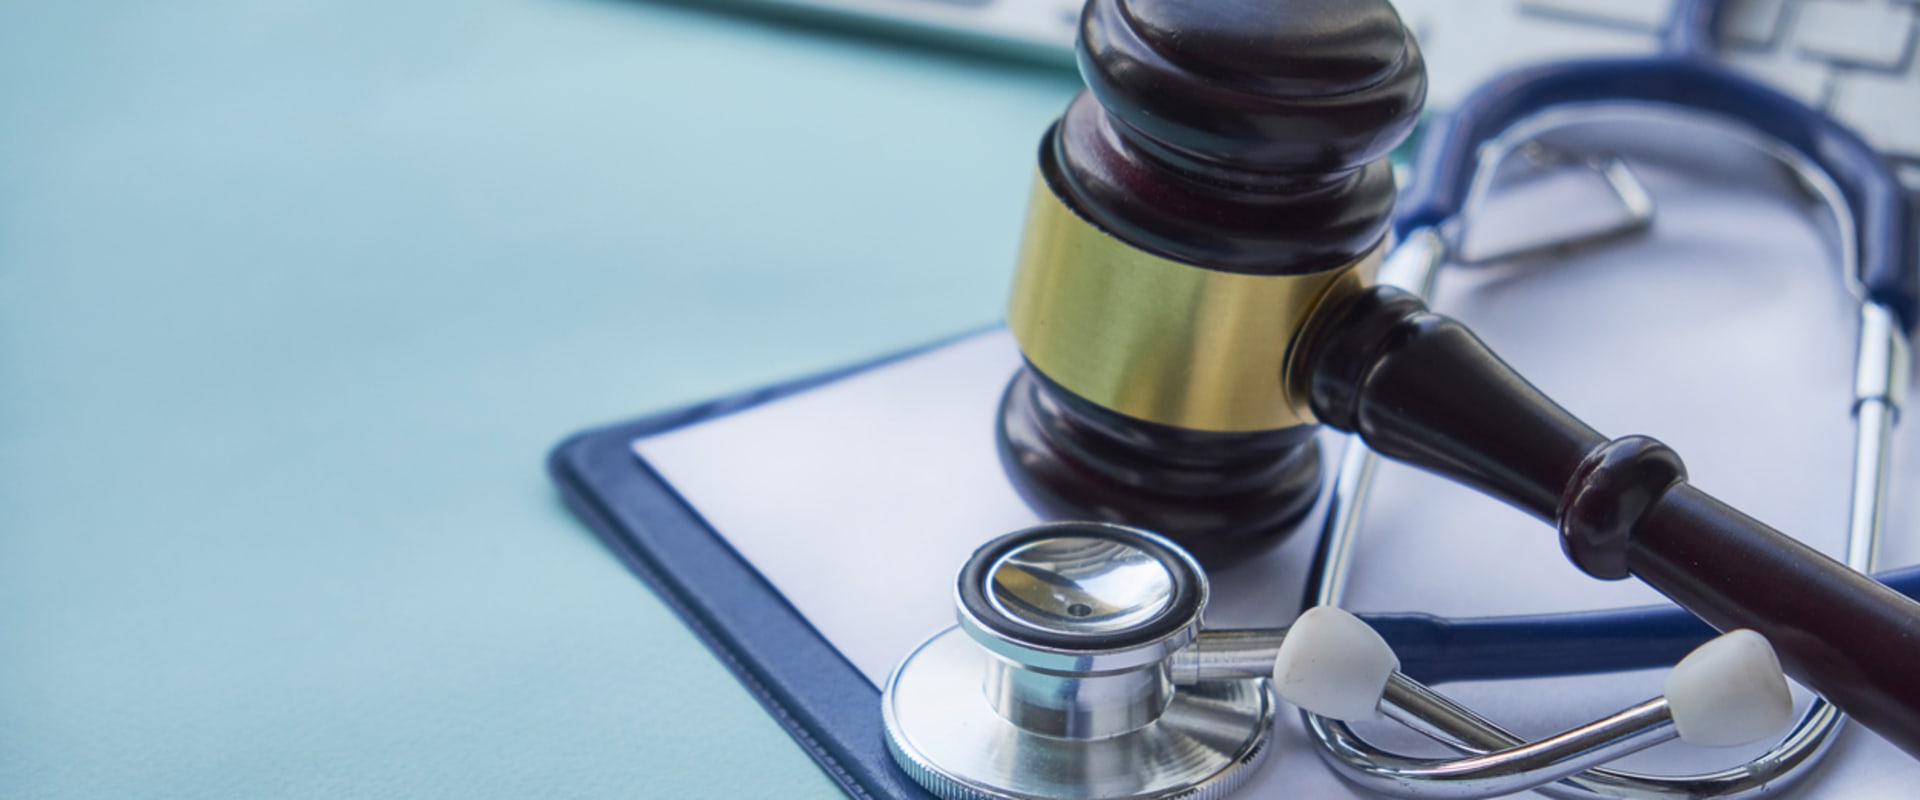 What is the most common malpractice?